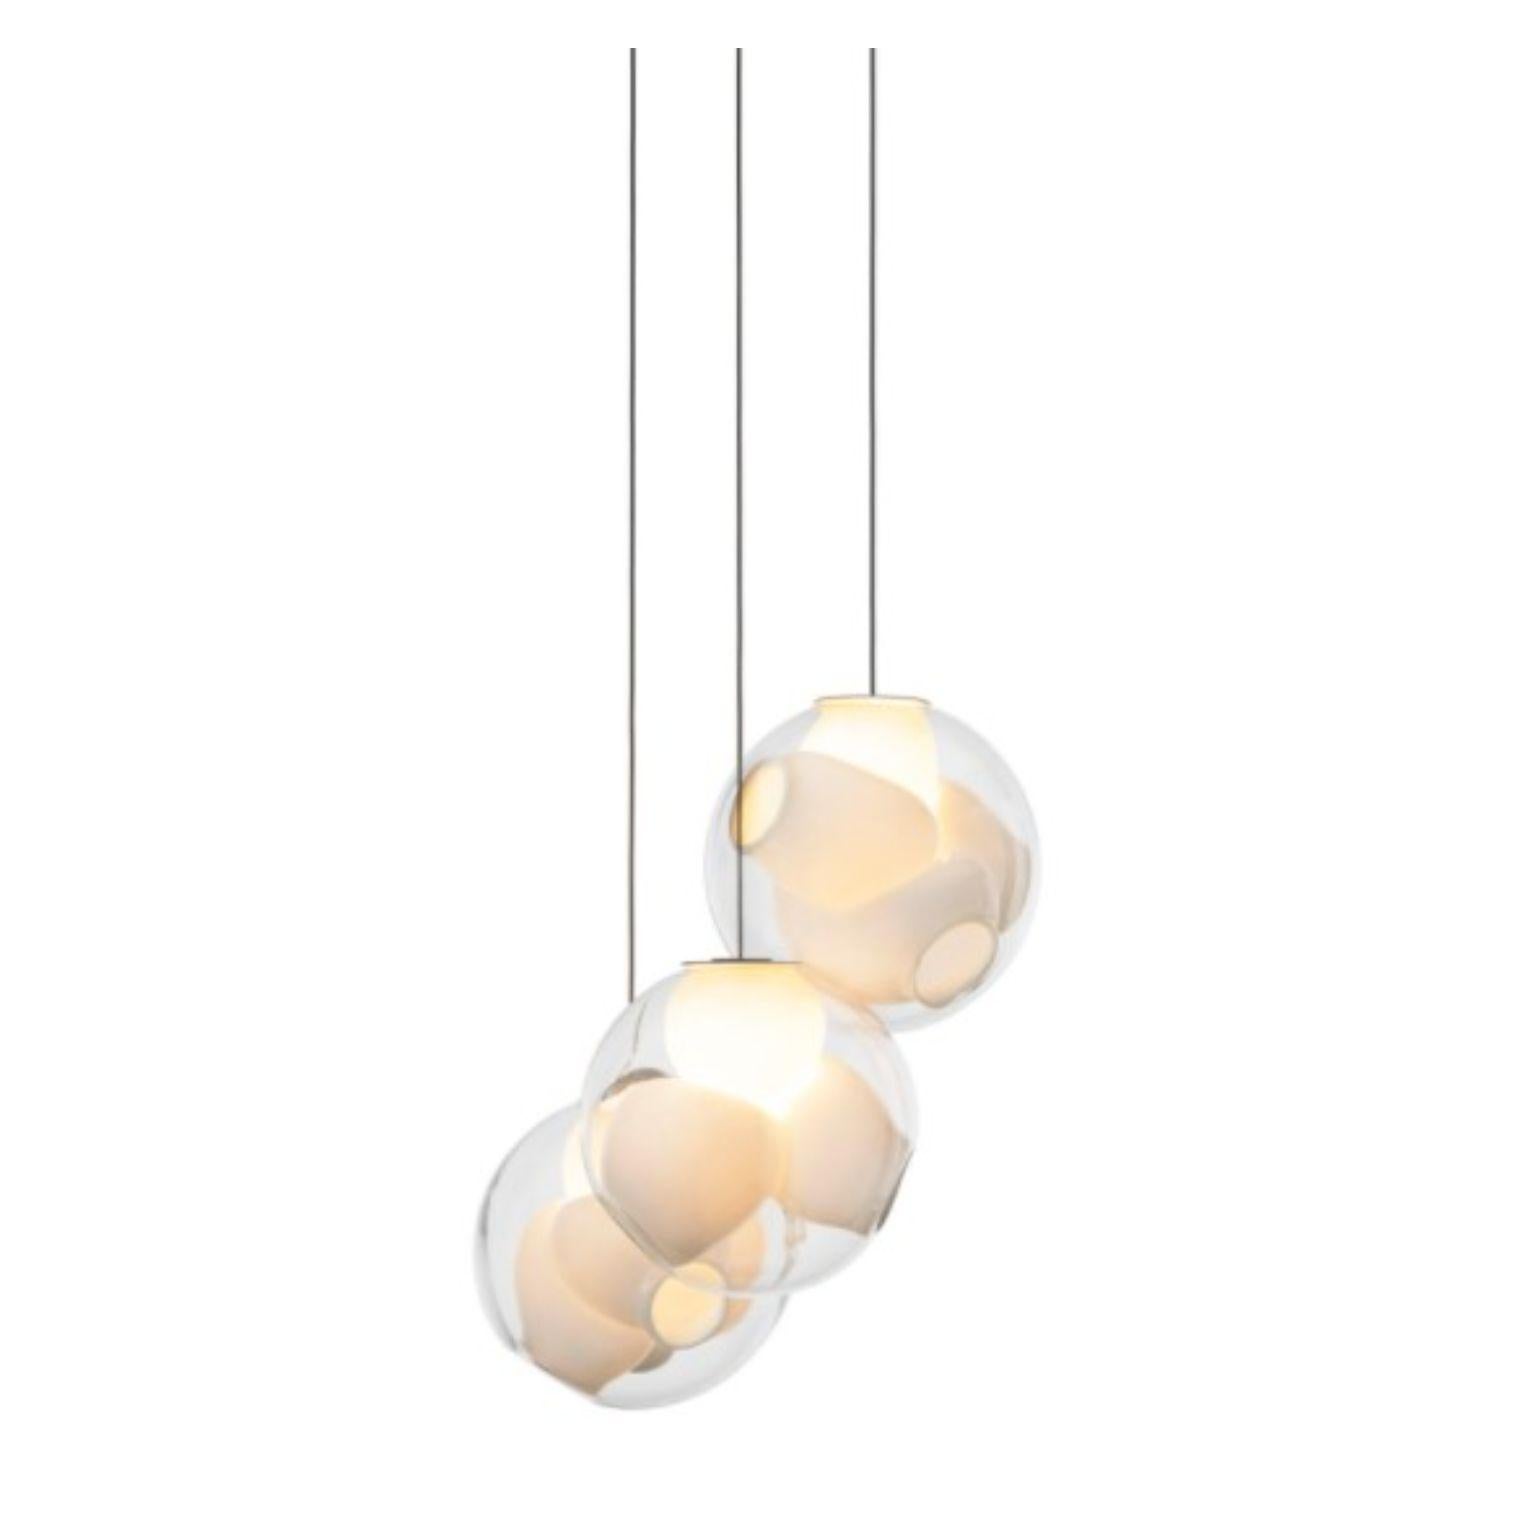 38.3 Pendant by Bocci
Dimensions: D20.3 x H300 cm
Materials: brushed nickel round canopy
Weight: 8.2 kg
Also available in different dimensions and models.

All our lamps can be wired according to each country. If sold to the USA it will be